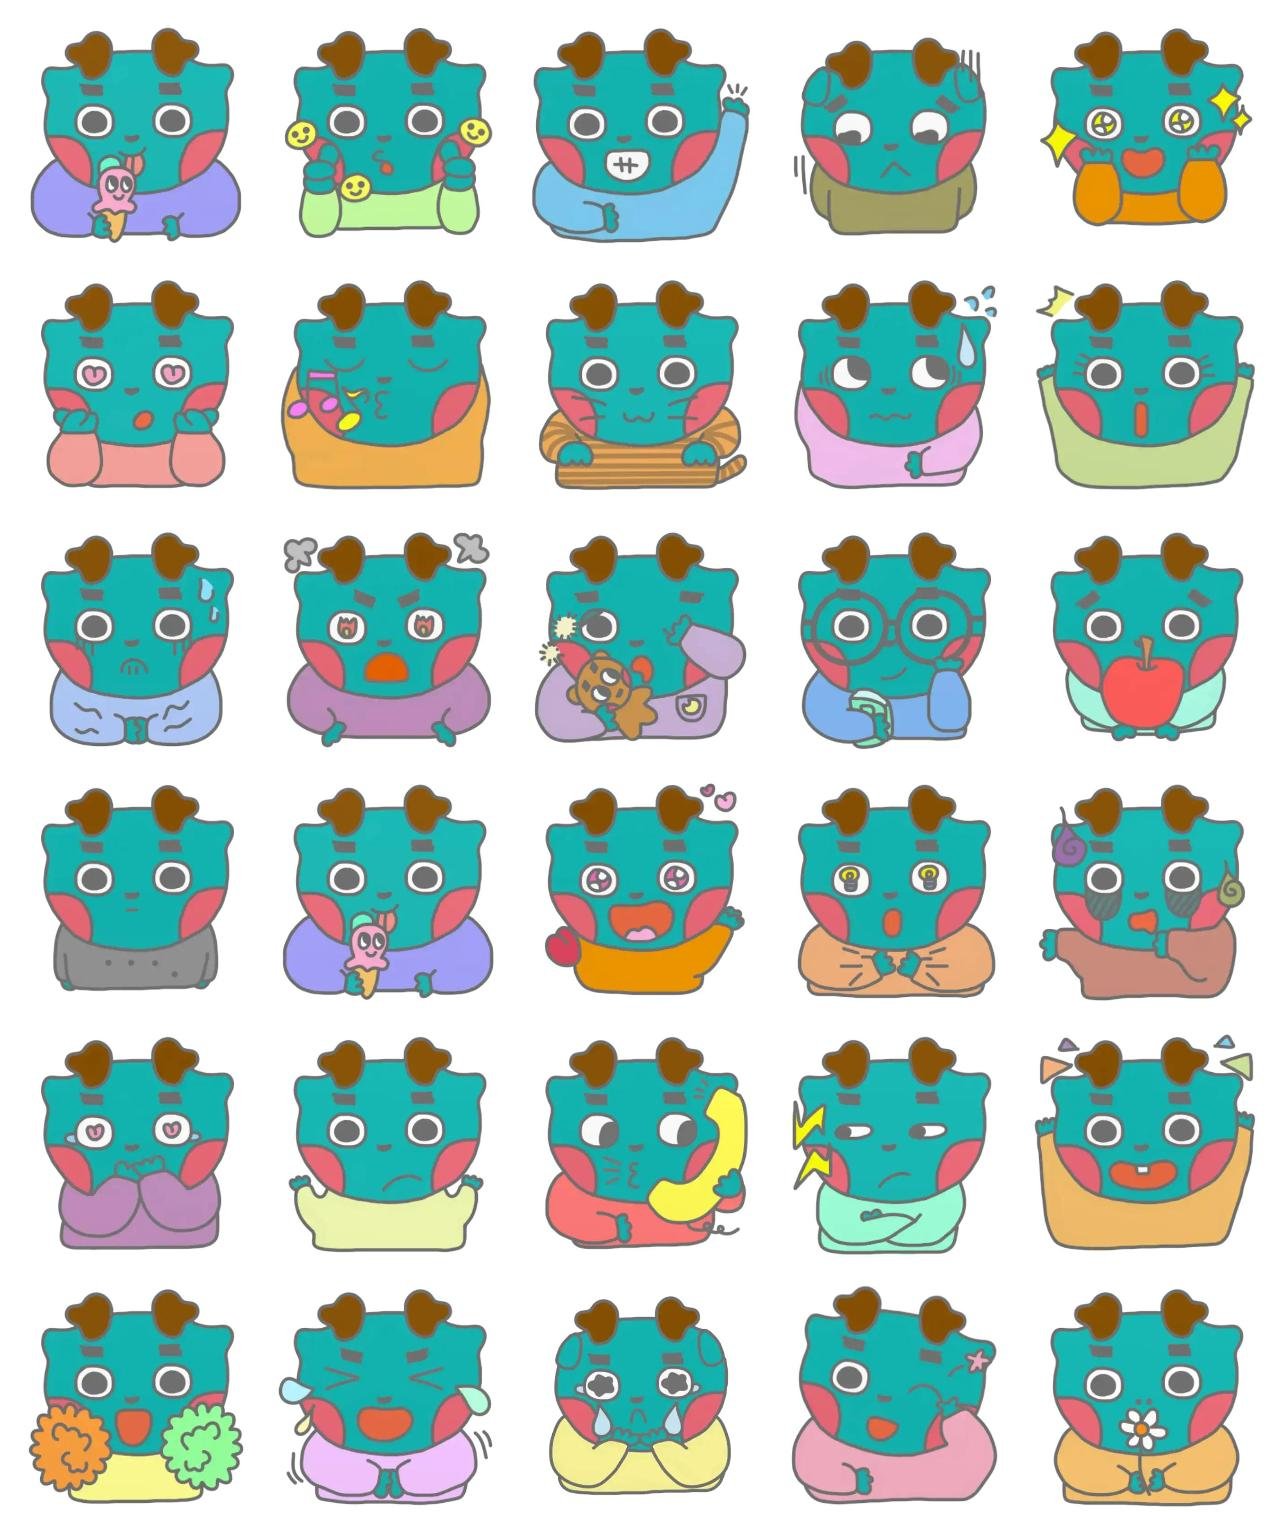 Hello Angdangi Animation/Cartoon,Phrases sticker pack for Whatsapp, Telegram, Signal, and others chatting and message apps